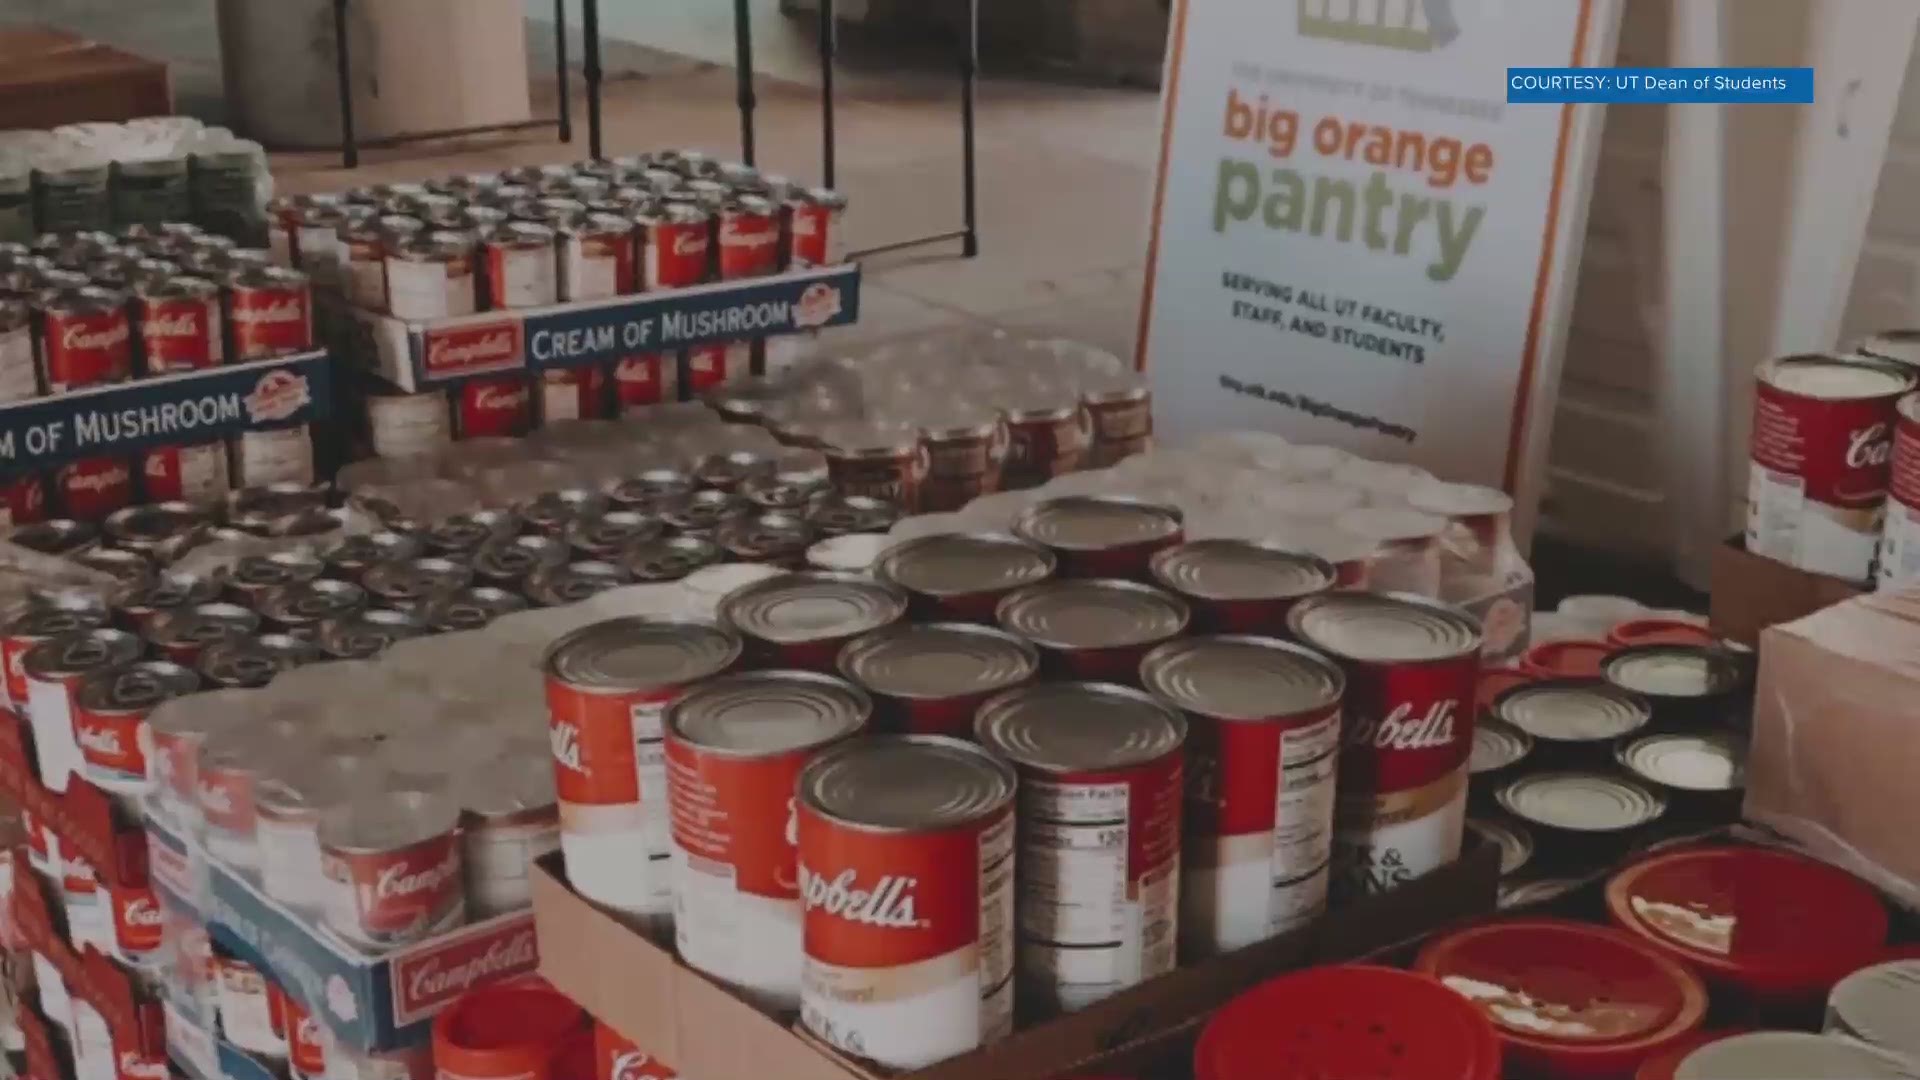 Food pantries say more people are relying on food banks as the pandemic continues. Now, a new pantry at UT could help curb some of that need.